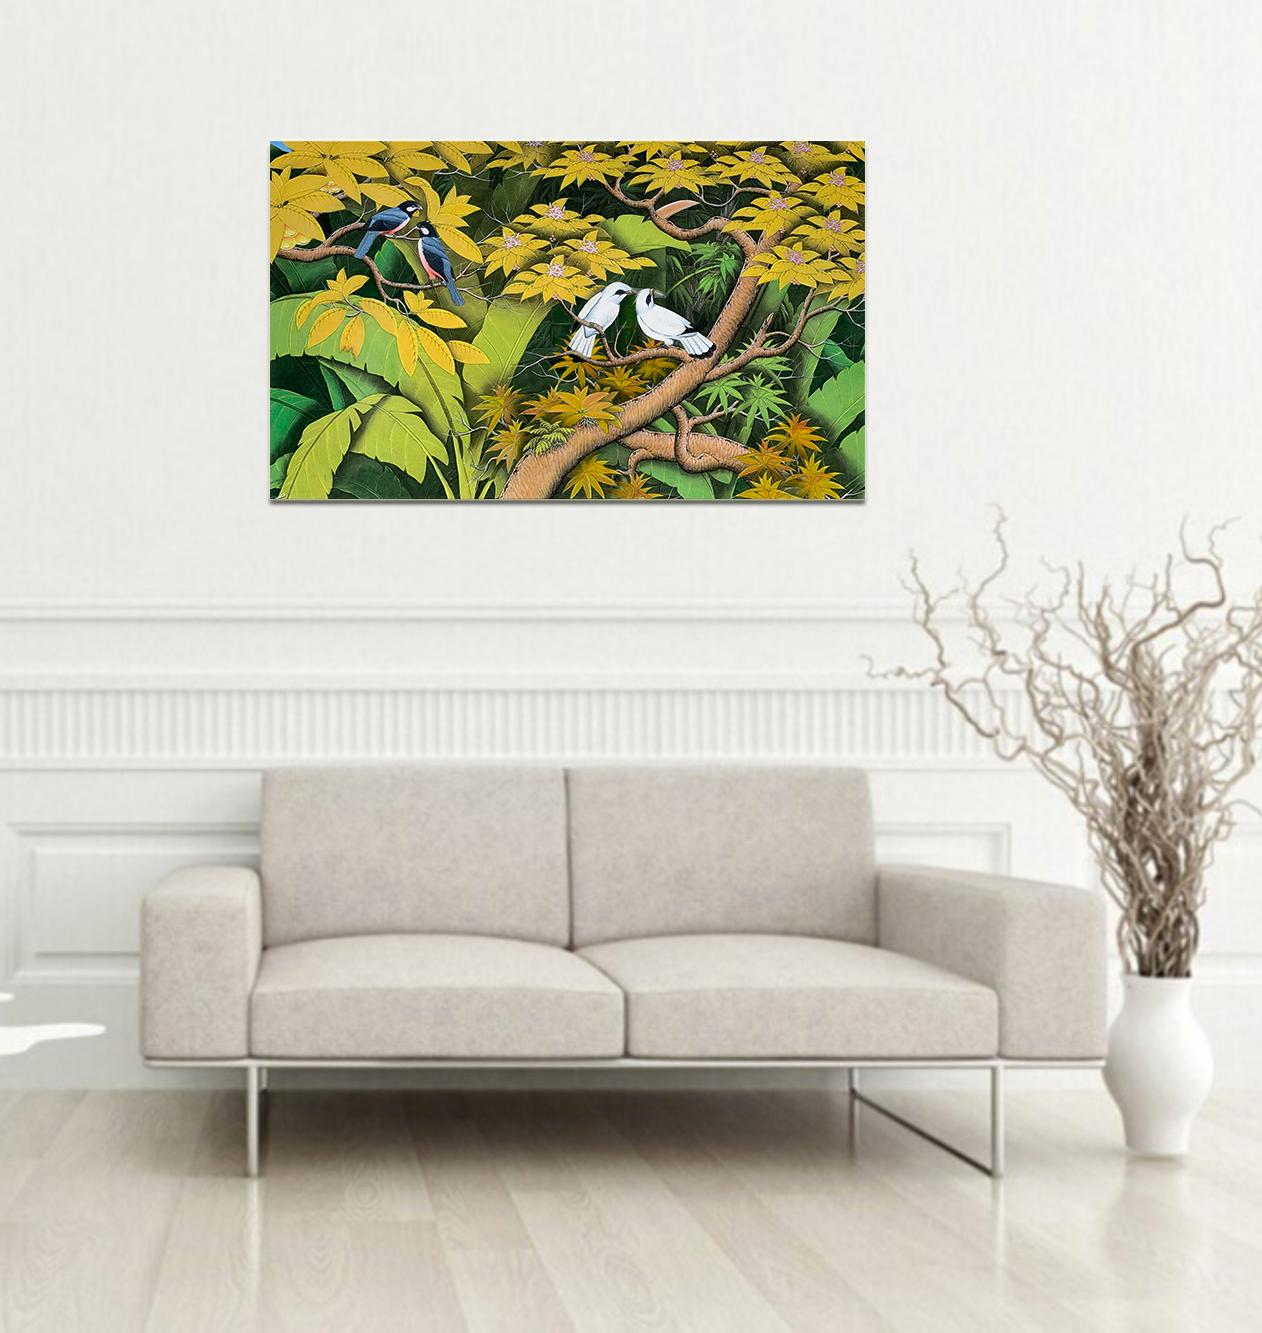 Summer Love by Katharina Husslein contemporary birds and jungle landscape 6